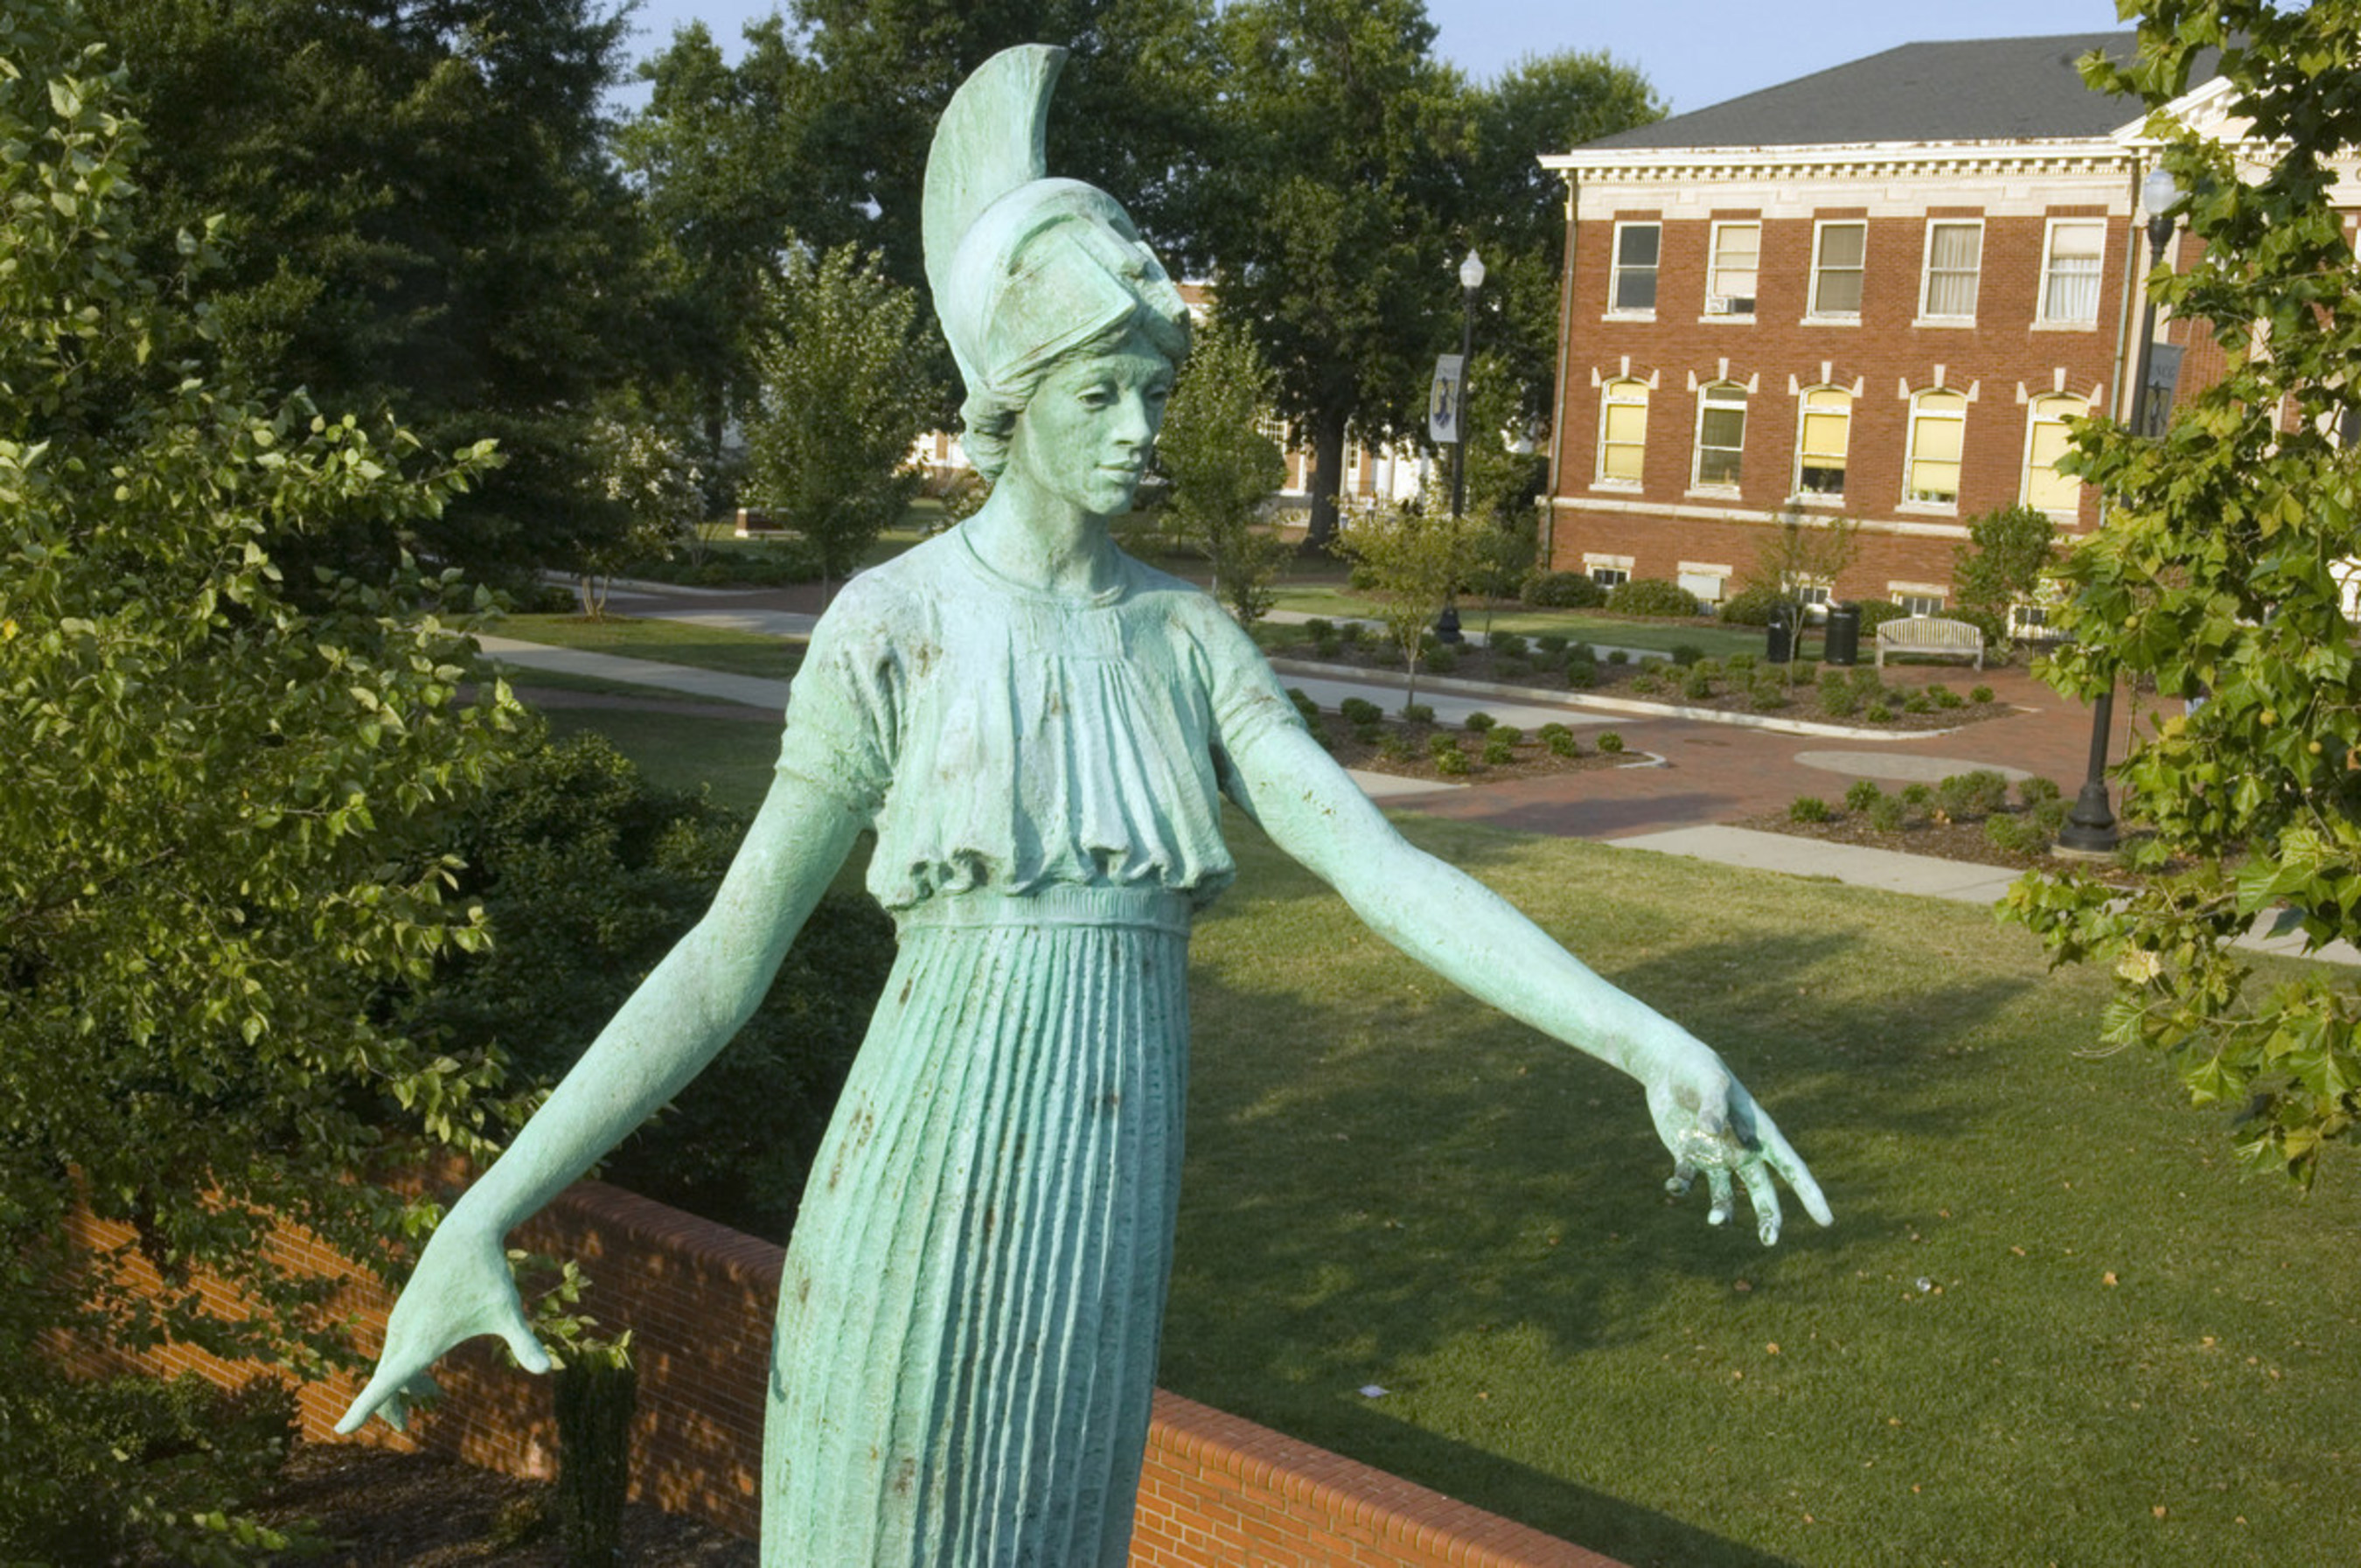 Founded in 1891, UNCG is the largest and most diverse university in the Triad region of North Carolina, serving more than 18,000 students. The statue of Minerva is one of the university's icons.